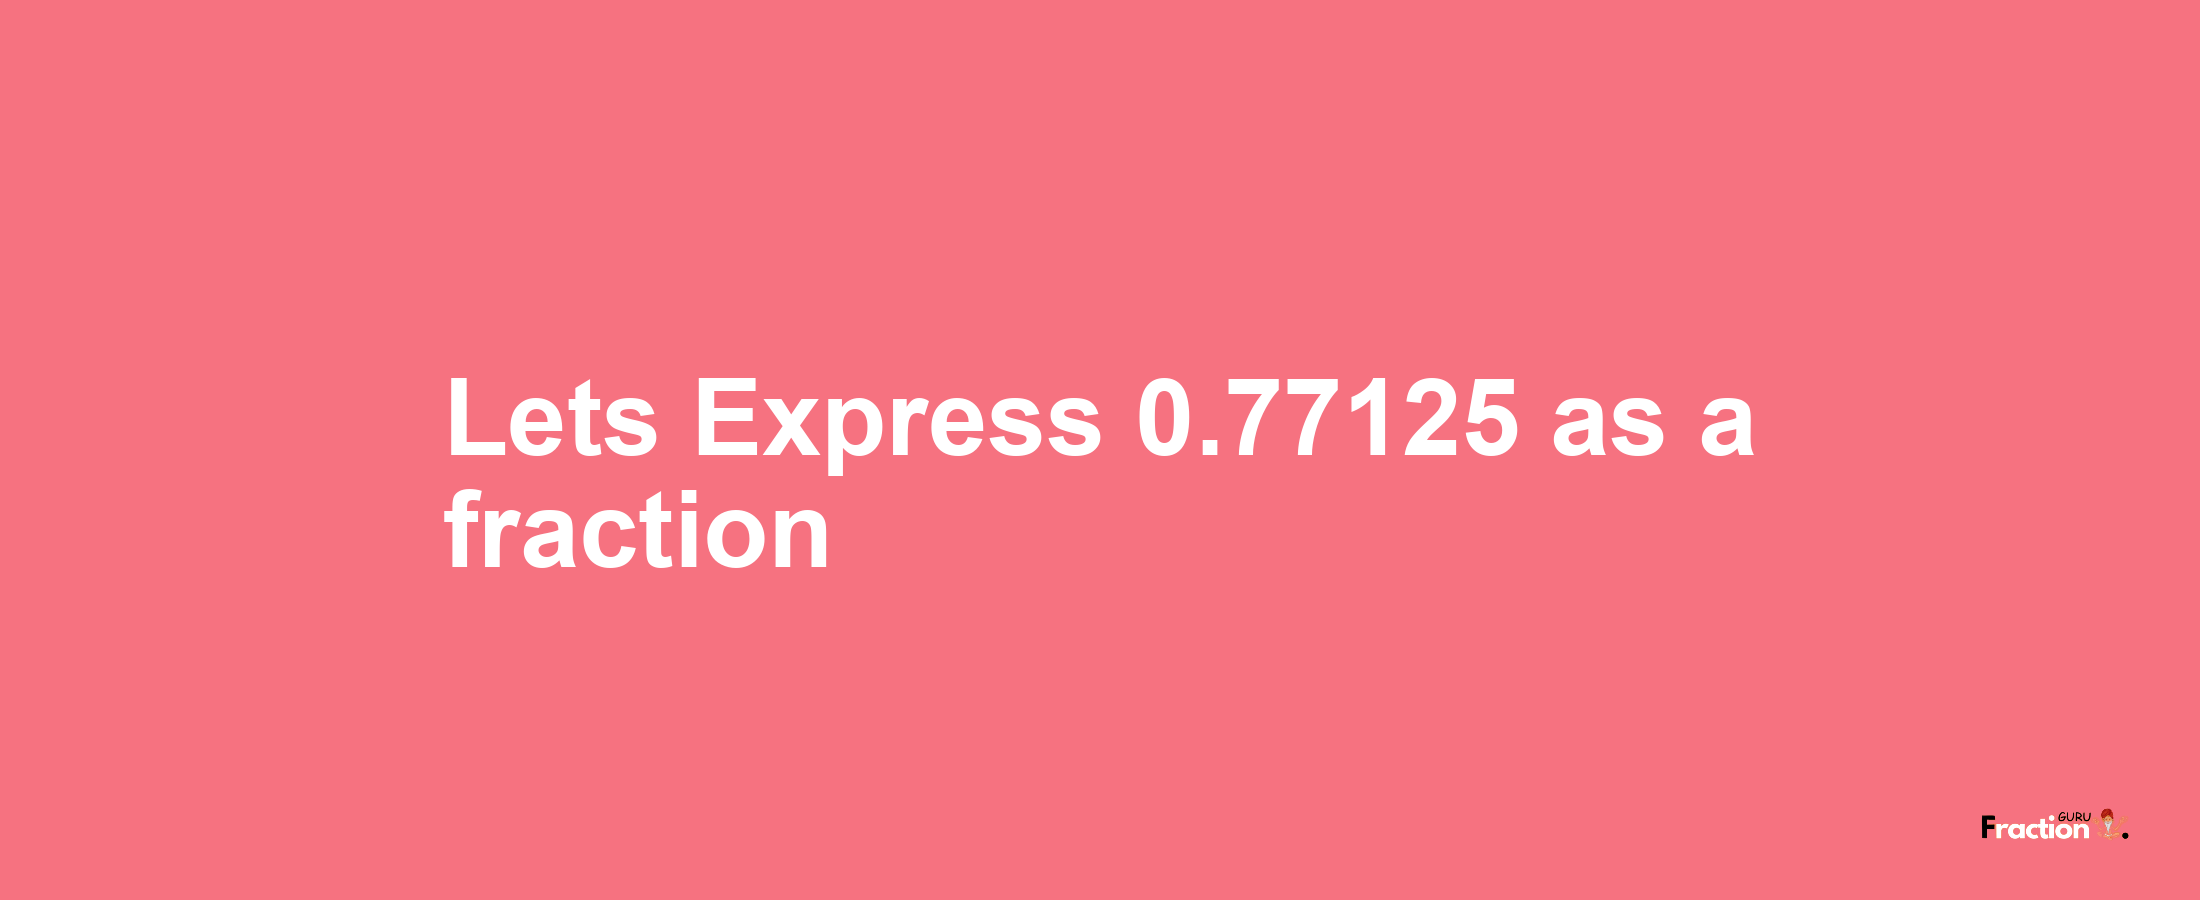 Lets Express 0.77125 as afraction